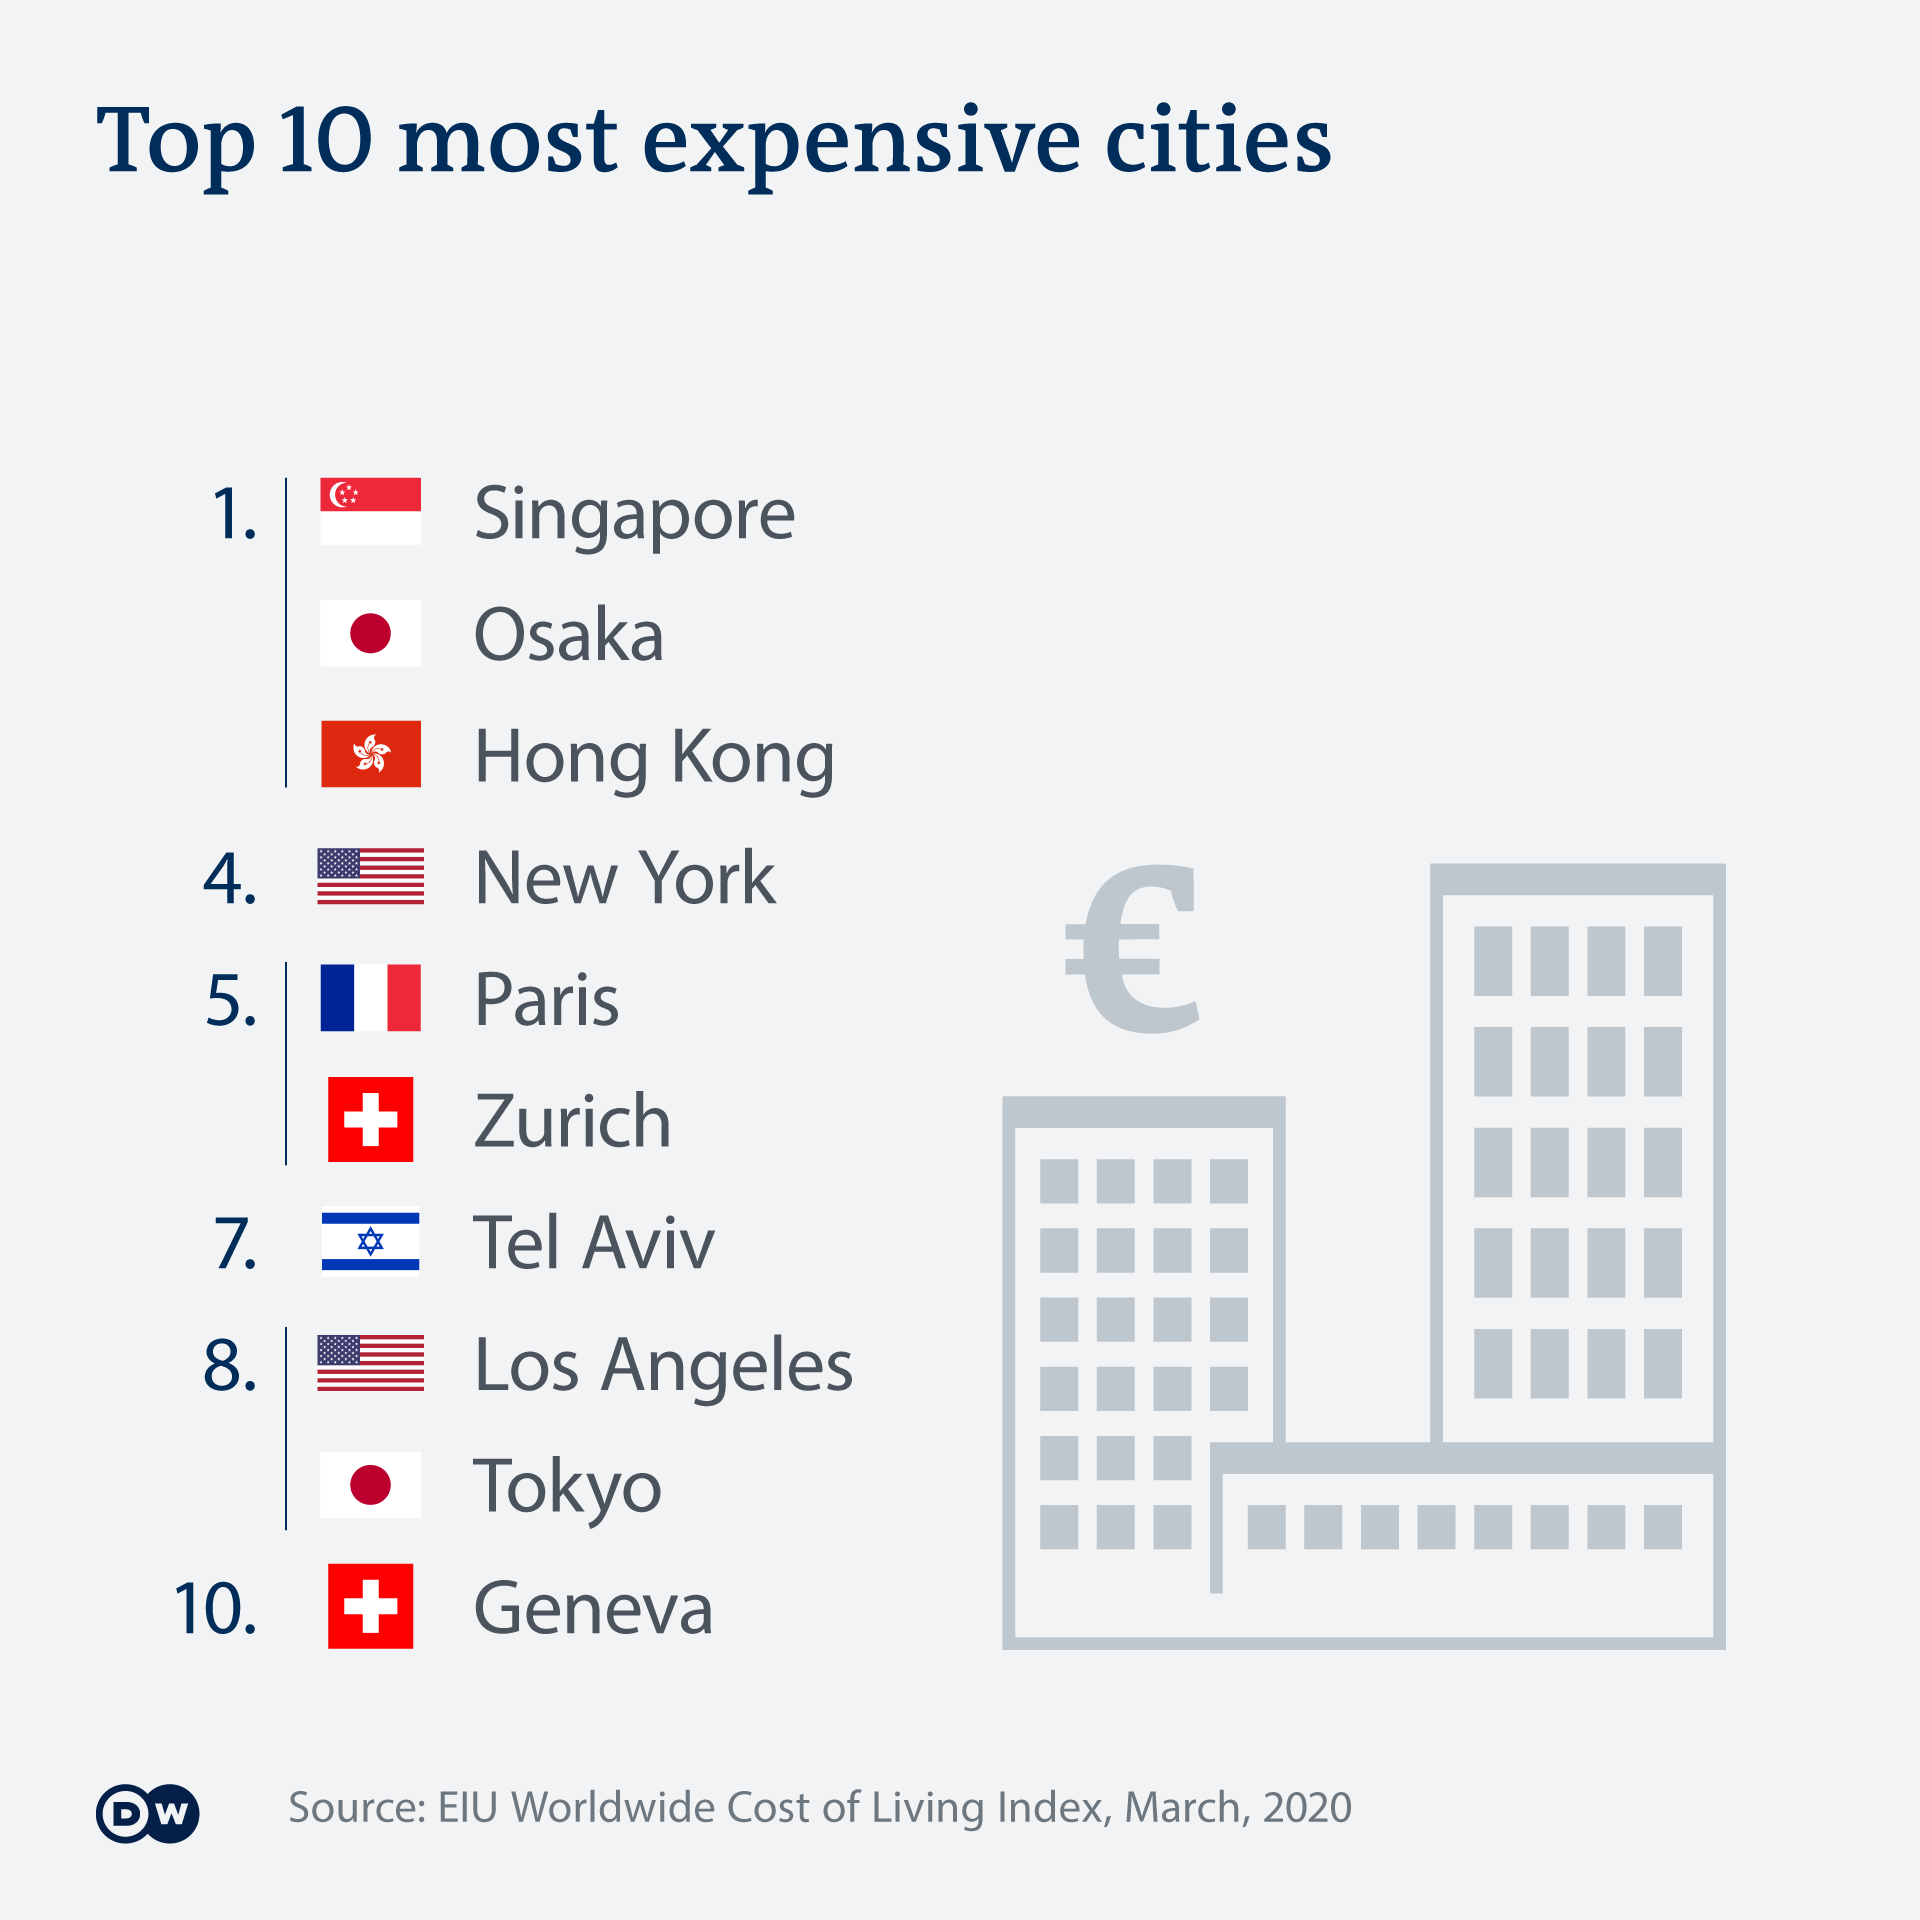 Europe loses 'world's expensive city' crown to Asia – DW – 03/18/2020